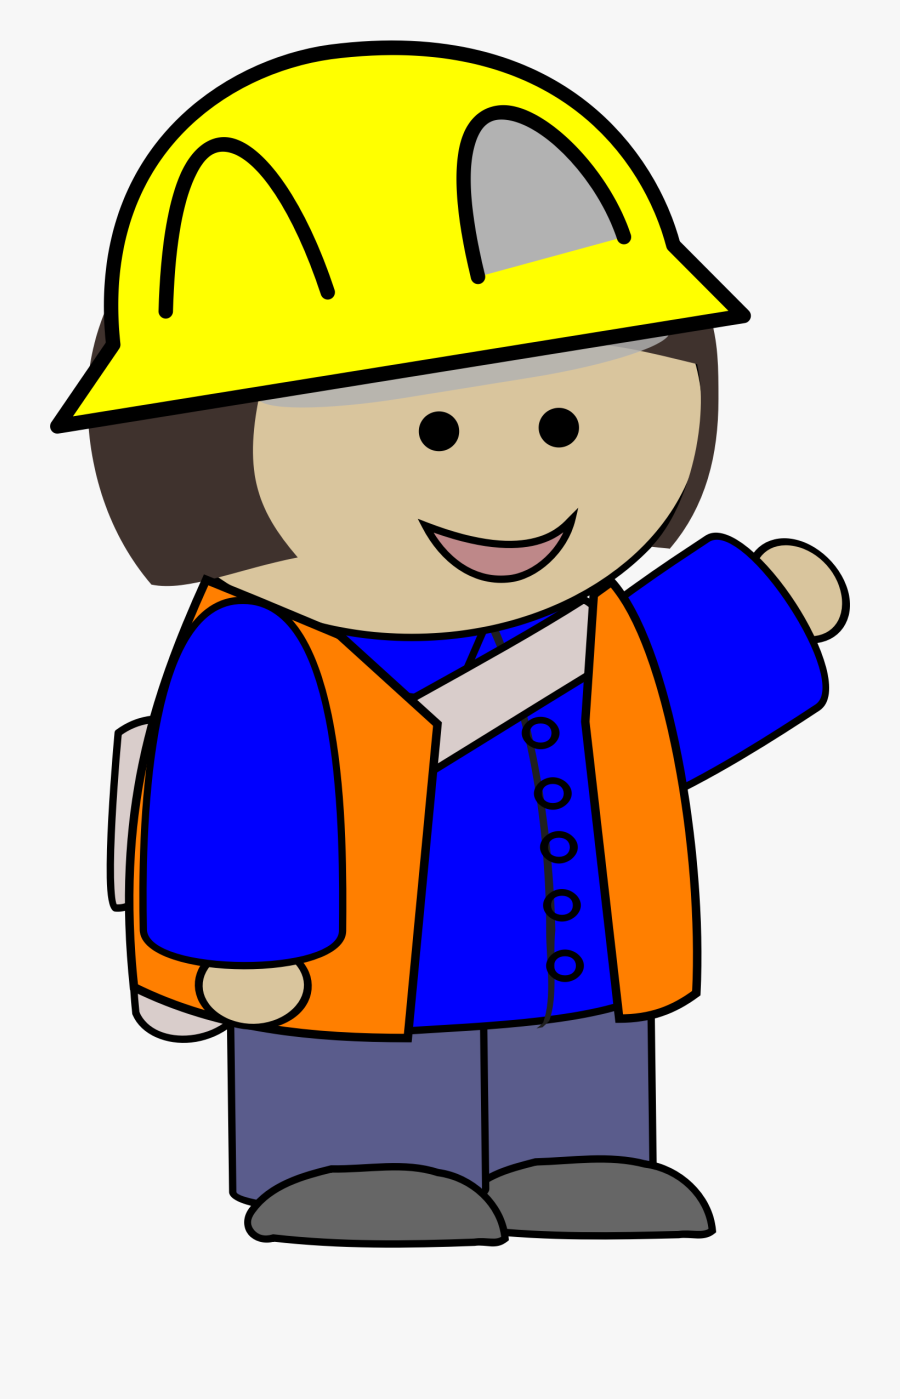 Girl Clipart Construction - Construction Worker With Hat Clipart, Transparent Clipart